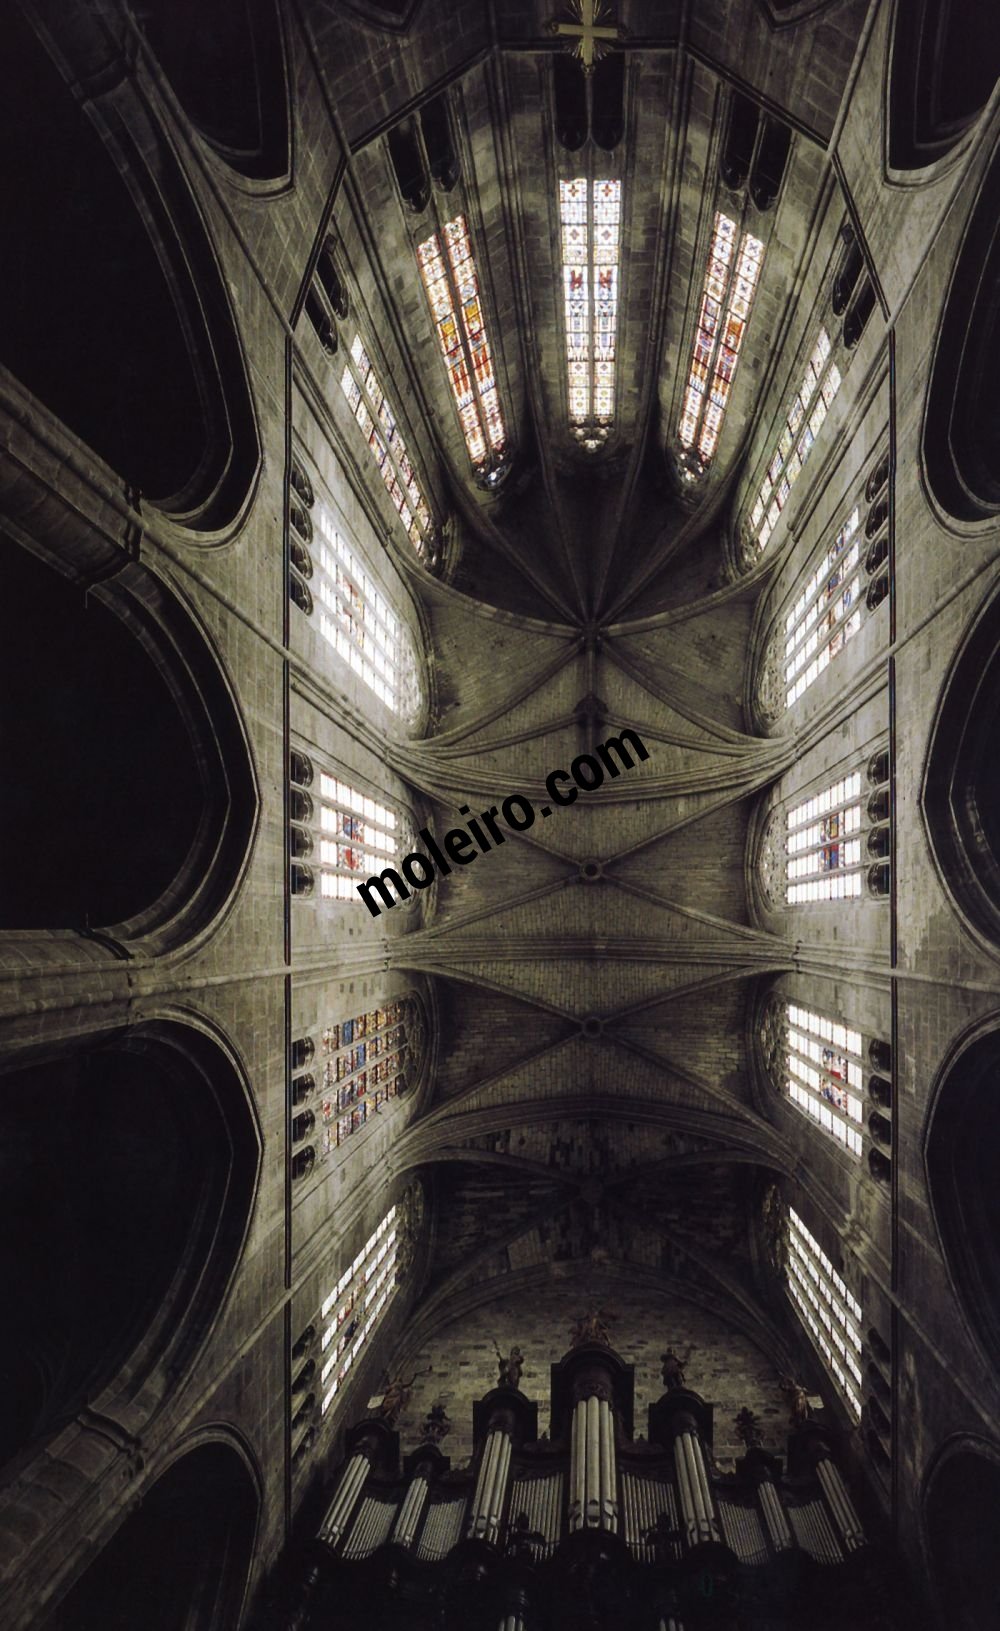 Talleres de Arquitectura en la Edad Media Narbonne, France, inside the cathedral, choir vault, 13th and 14th C.